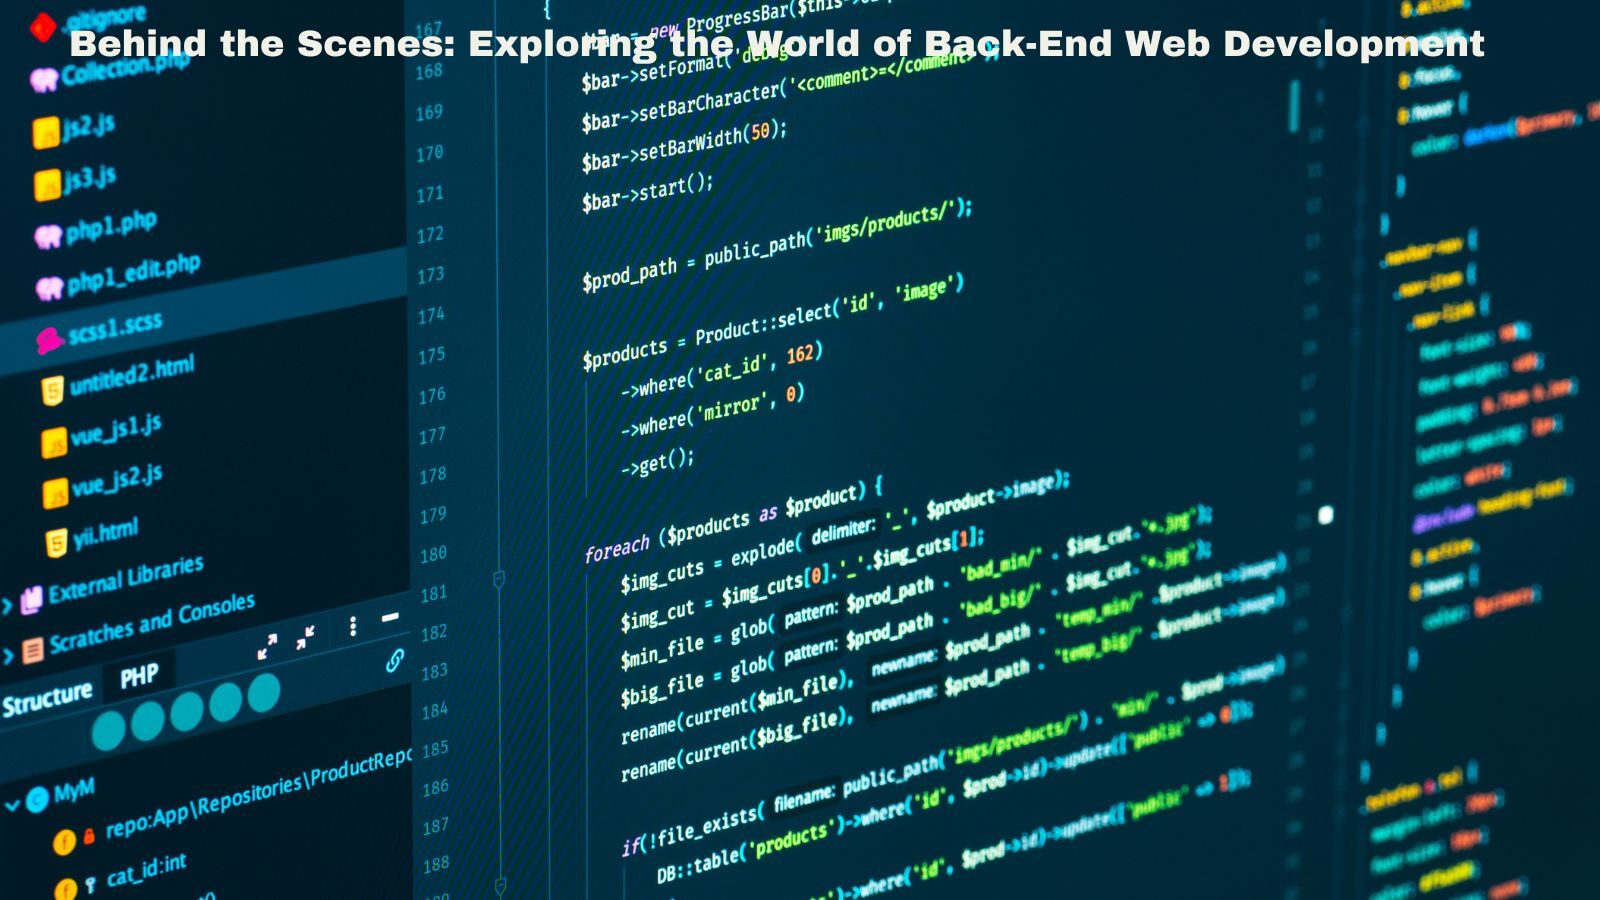 Behind the Scenes: Exploring the World of Back-End Web Development